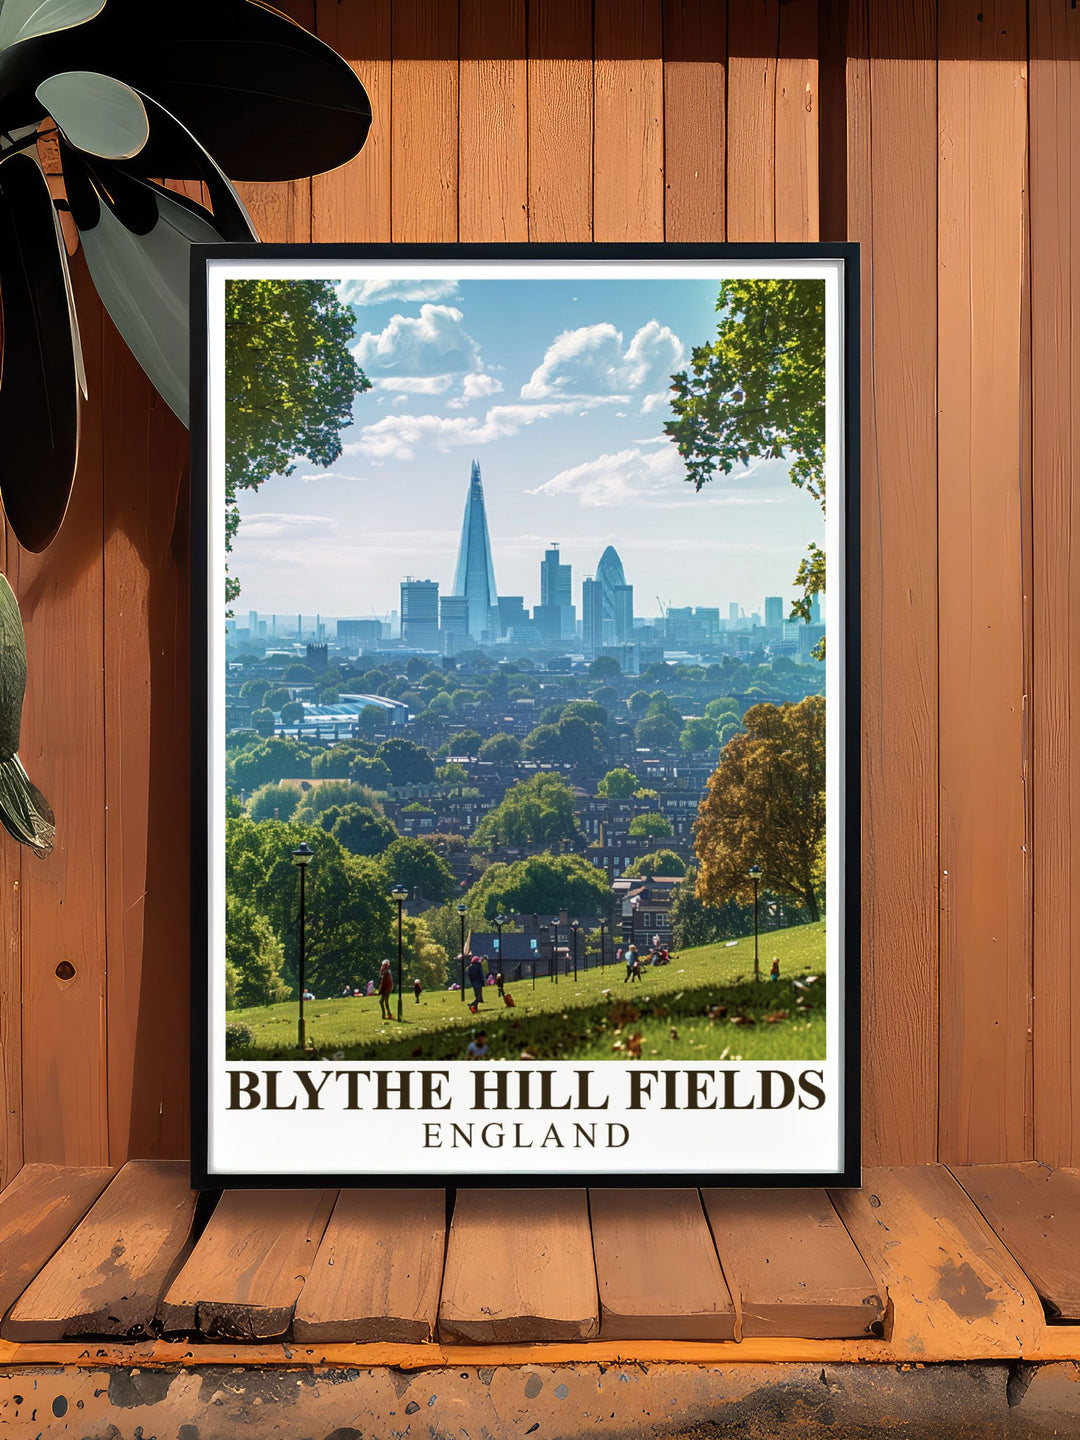 Featuring the expansive green spaces and scenic vistas of Blythe Hill Fields, this travel poster captures the essence of Londons park beauty, perfect for those who appreciate natural landscapes.